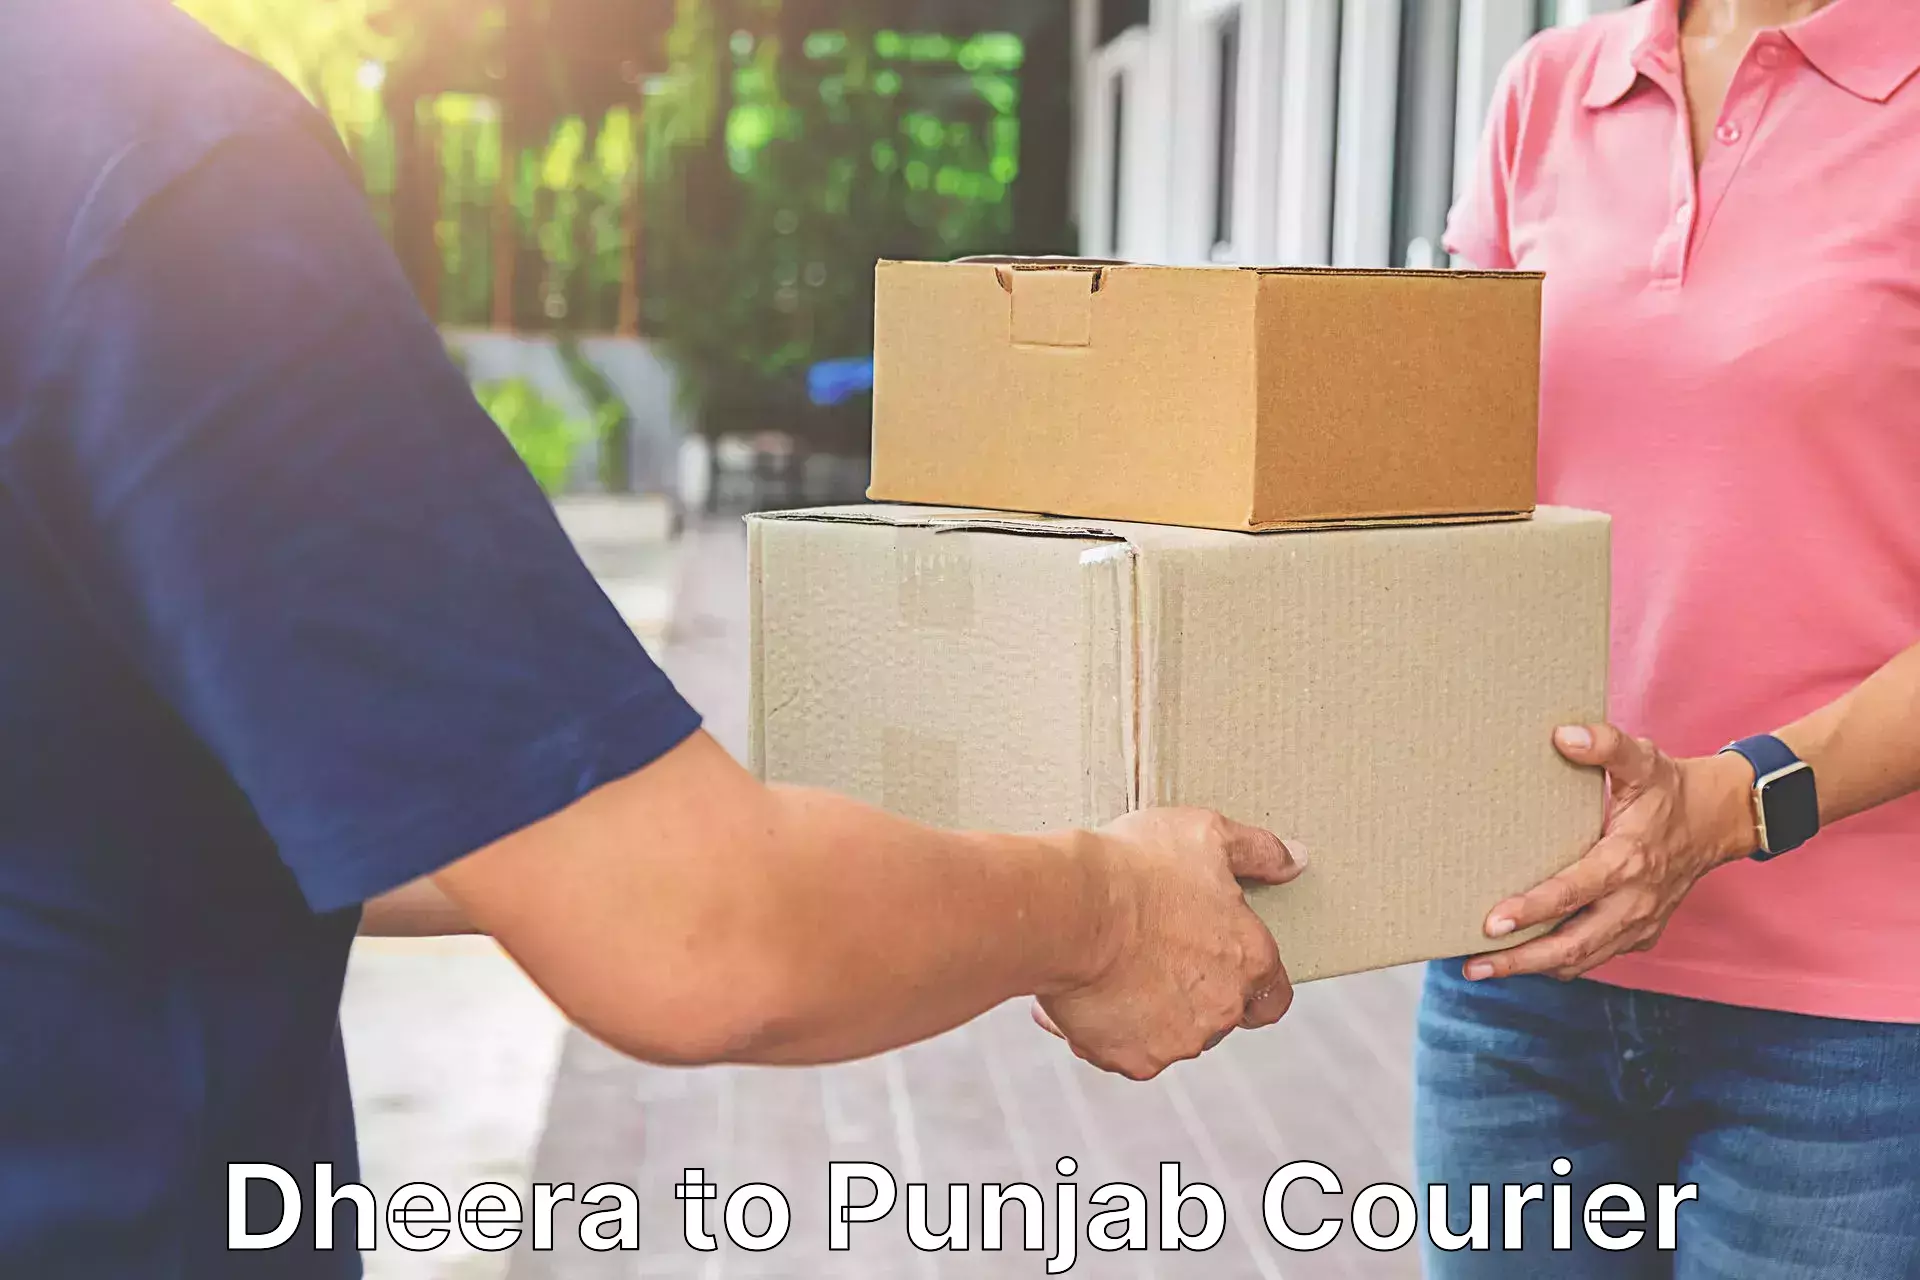 Parcel handling and care Dheera to Rajpura